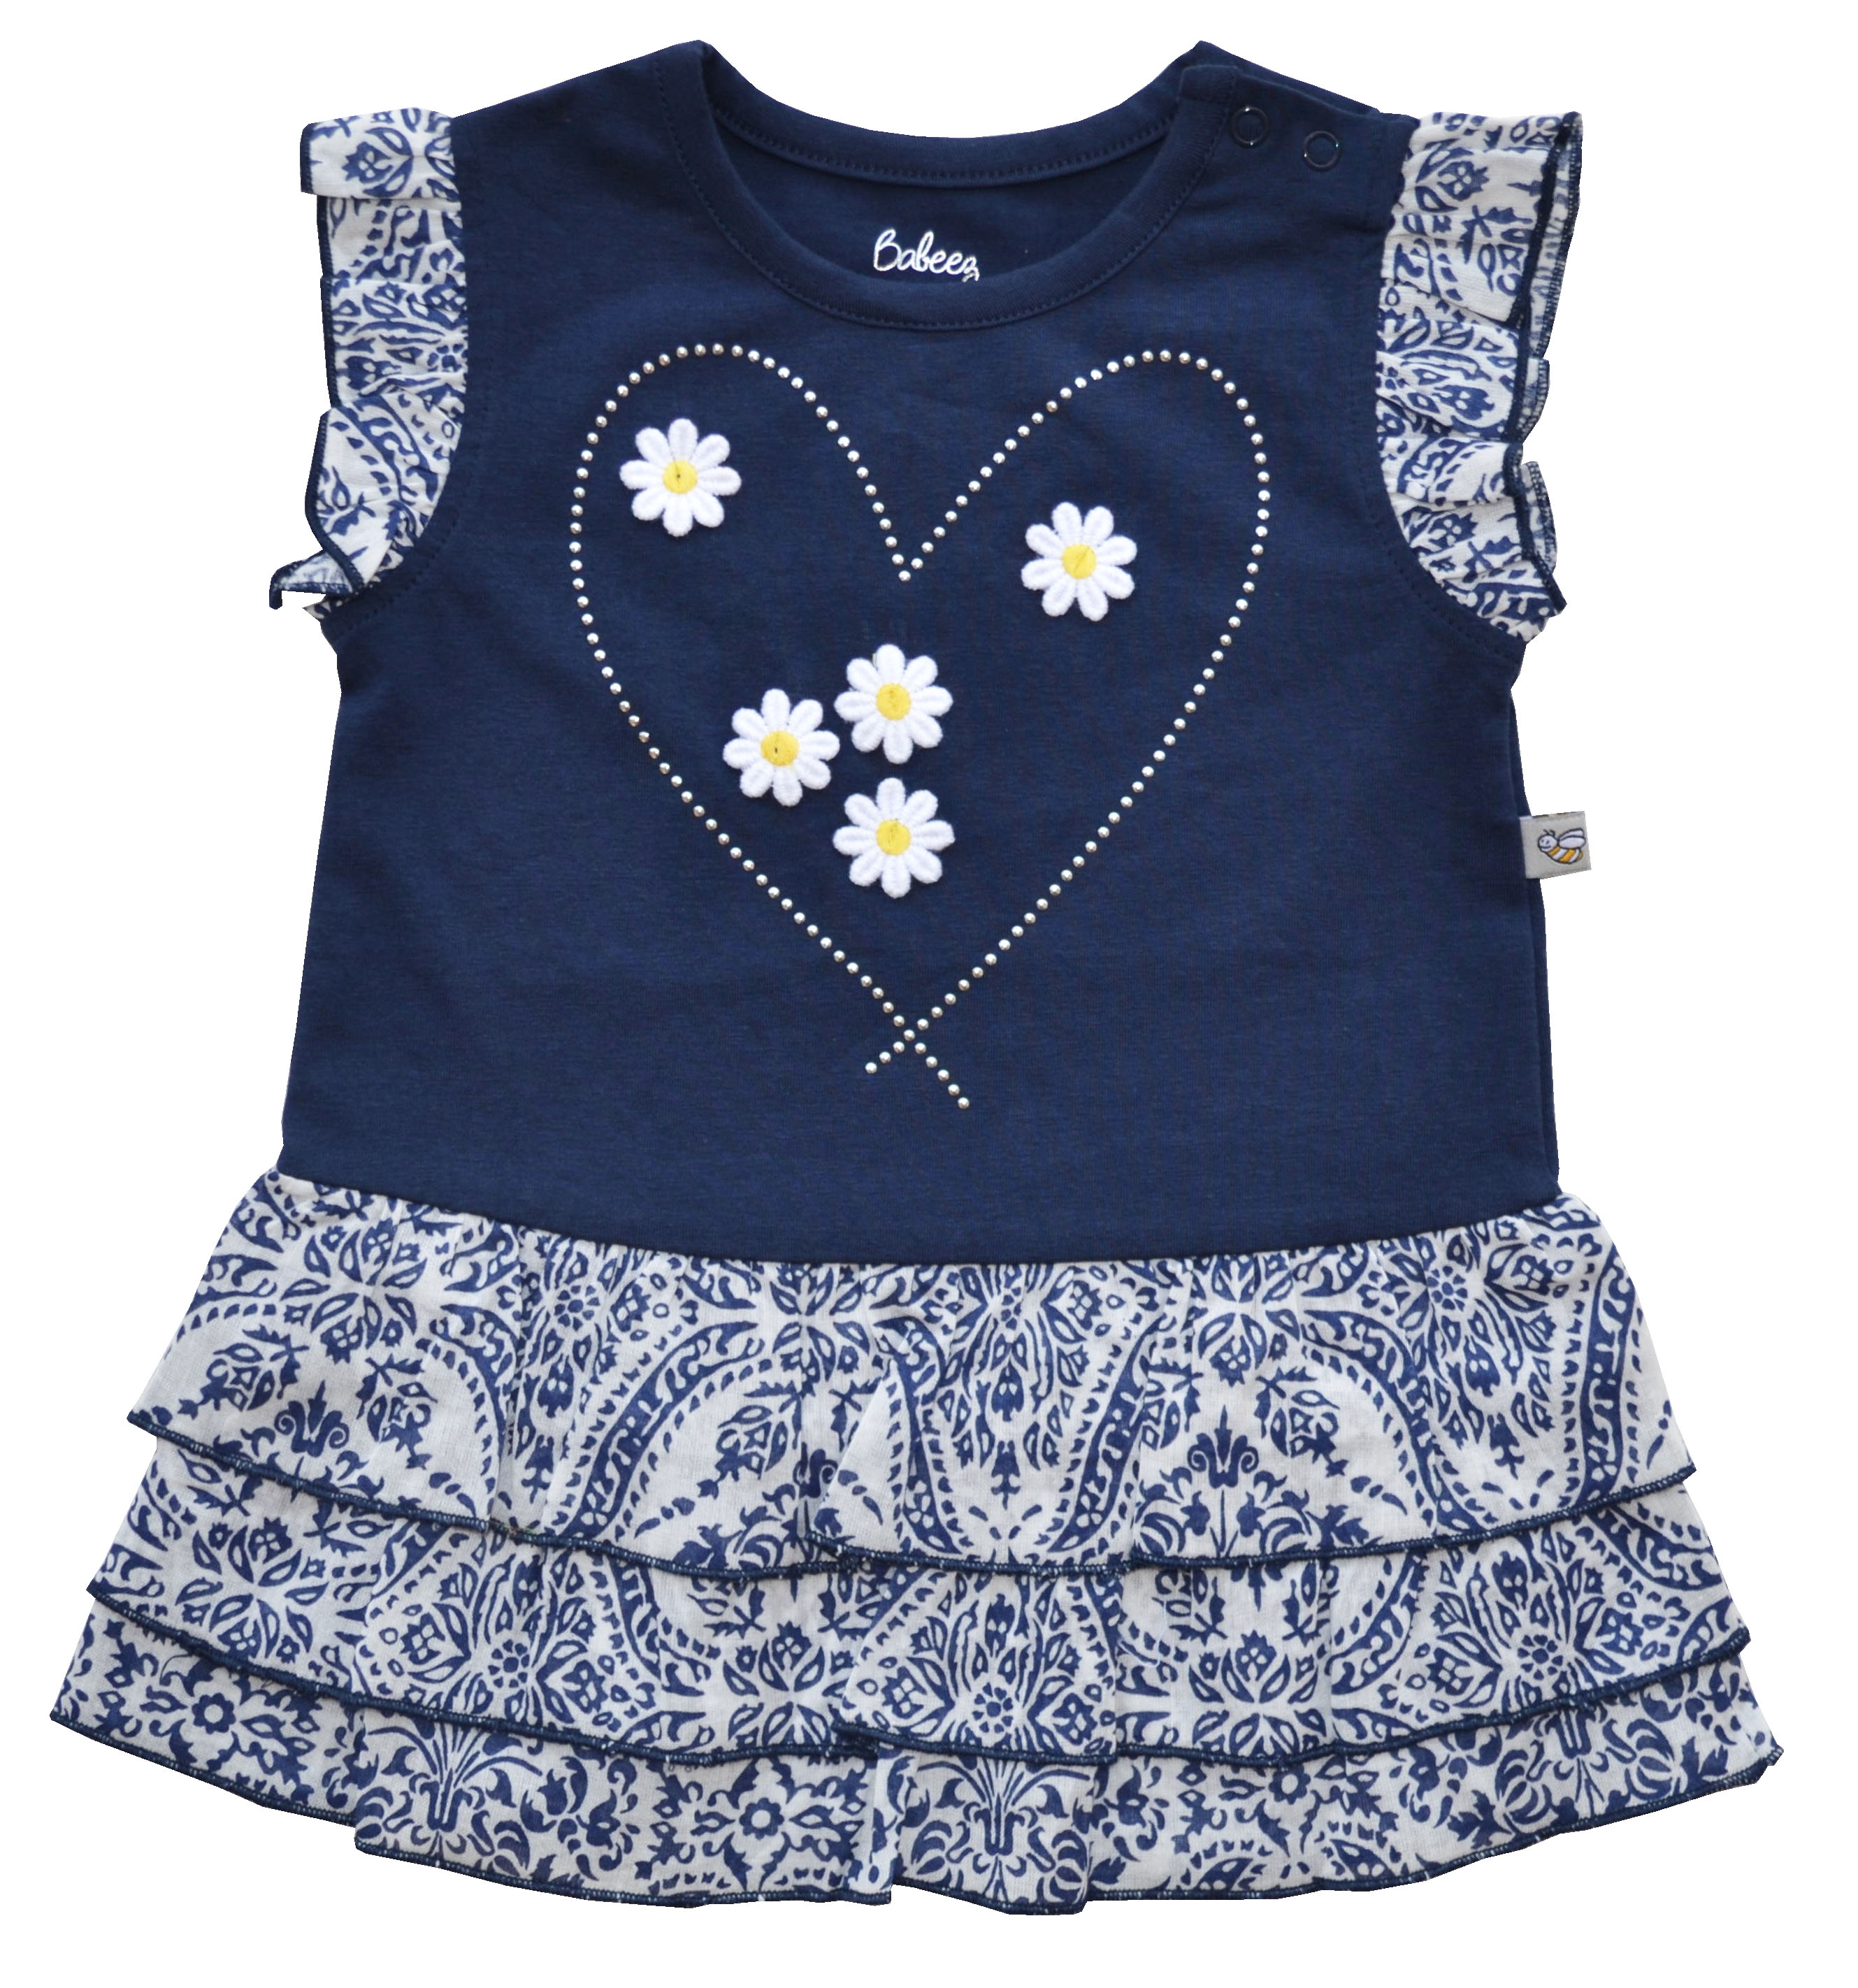 Blue Dress with Allover Flower Printed Frills and Flower Applique on Chest (100% Cotton)